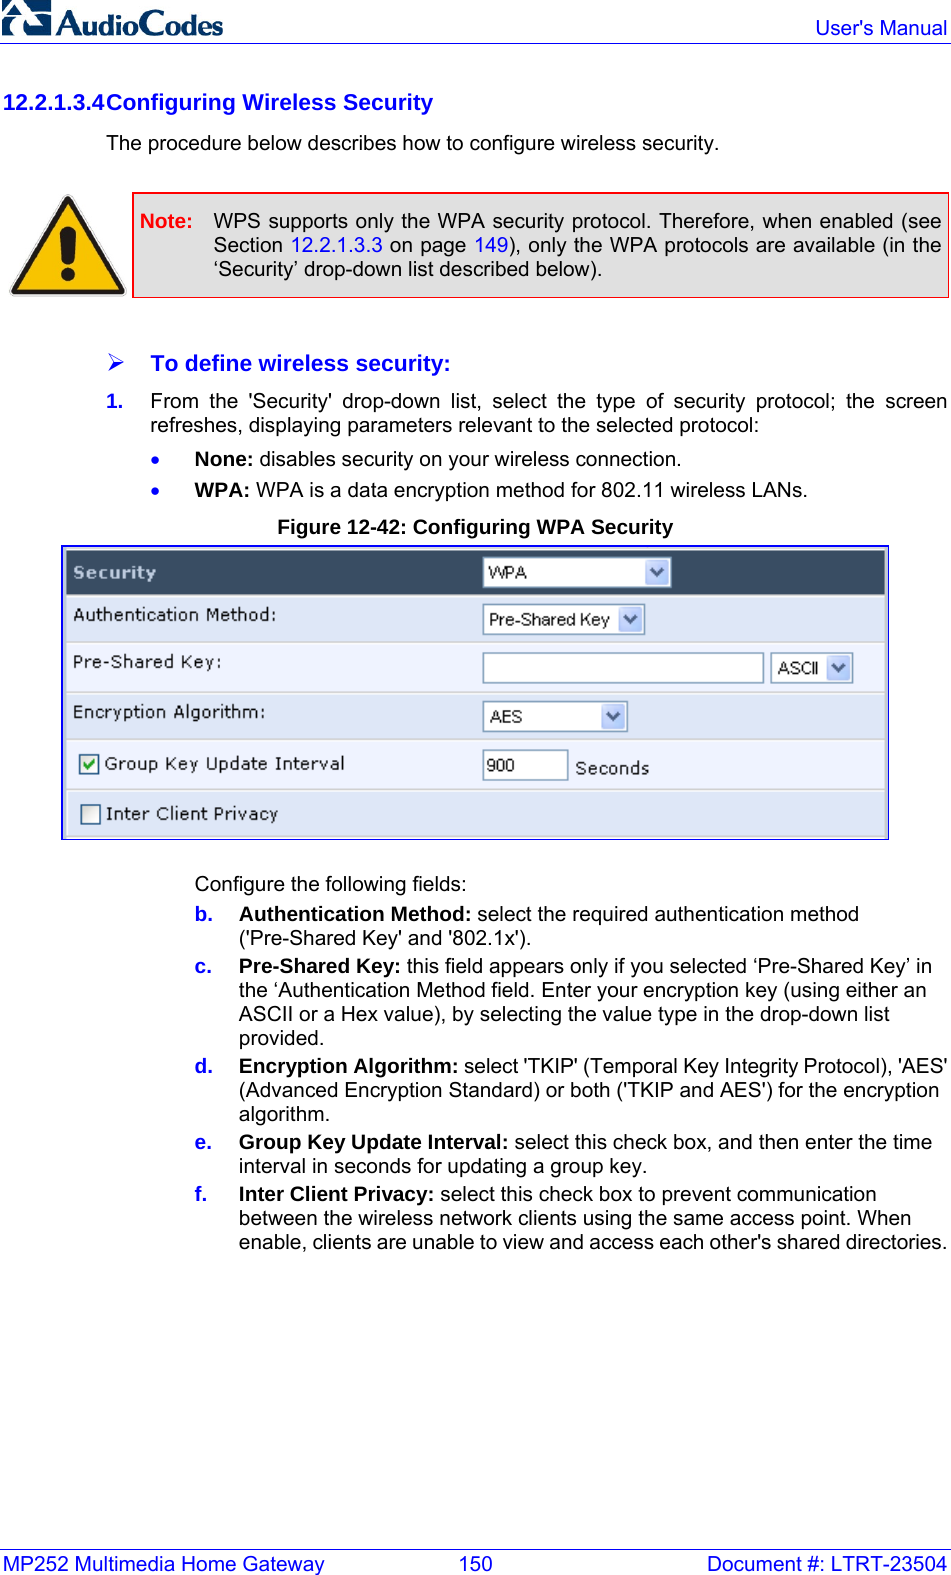 MP252 Multimedia Home Gateway  150  Document #: LTRT-23504  User&apos;s Manual  12.2.1.3.4 Configuring Wireless Security The procedure below describes how to configure wireless security.   Note:  WPS supports only the WPA security protocol. Therefore, when enabled (see Section 12.2.1.3.3 on page 149), only the WPA protocols are available (in the ‘Security’ drop-down list described below).  ¾ To define wireless security: 1.  From the &apos;Security&apos; drop-down list, select the type of security protocol; the screen refreshes, displaying parameters relevant to the selected protocol: • None: disables security on your wireless connection. • WPA: WPA is a data encryption method for 802.11 wireless LANs. Figure 12-42: Configuring WPA Security  Configure the following fields: b.  Authentication Method: select the required authentication method (&apos;Pre-Shared Key&apos; and &apos;802.1x&apos;).  c.  Pre-Shared Key: this field appears only if you selected ‘Pre-Shared Key’ in the ‘Authentication Method field. Enter your encryption key (using either an ASCII or a Hex value), by selecting the value type in the drop-down list provided. d.  Encryption Algorithm: select &apos;TKIP&apos; (Temporal Key Integrity Protocol), &apos;AES&apos; (Advanced Encryption Standard) or both (&apos;TKIP and AES&apos;) for the encryption algorithm. e.  Group Key Update Interval: select this check box, and then enter the time interval in seconds for updating a group key. f.  Inter Client Privacy: select this check box to prevent communication between the wireless network clients using the same access point. When enable, clients are unable to view and access each other&apos;s shared directories. 